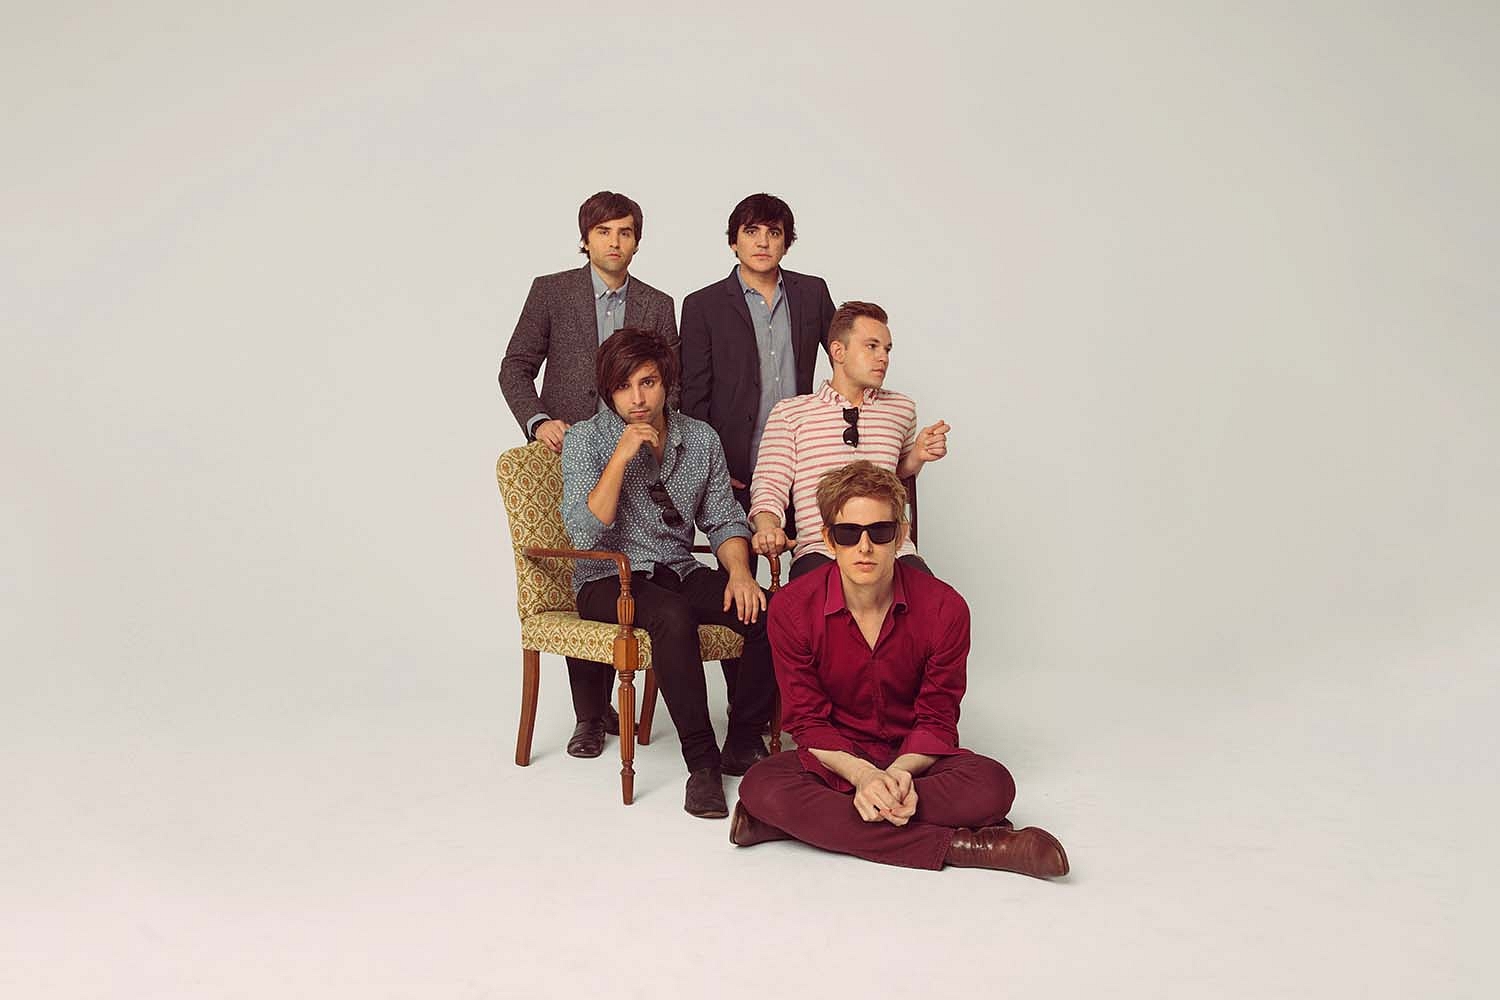 Spoon stream ‘They Want My Soul’ album in full